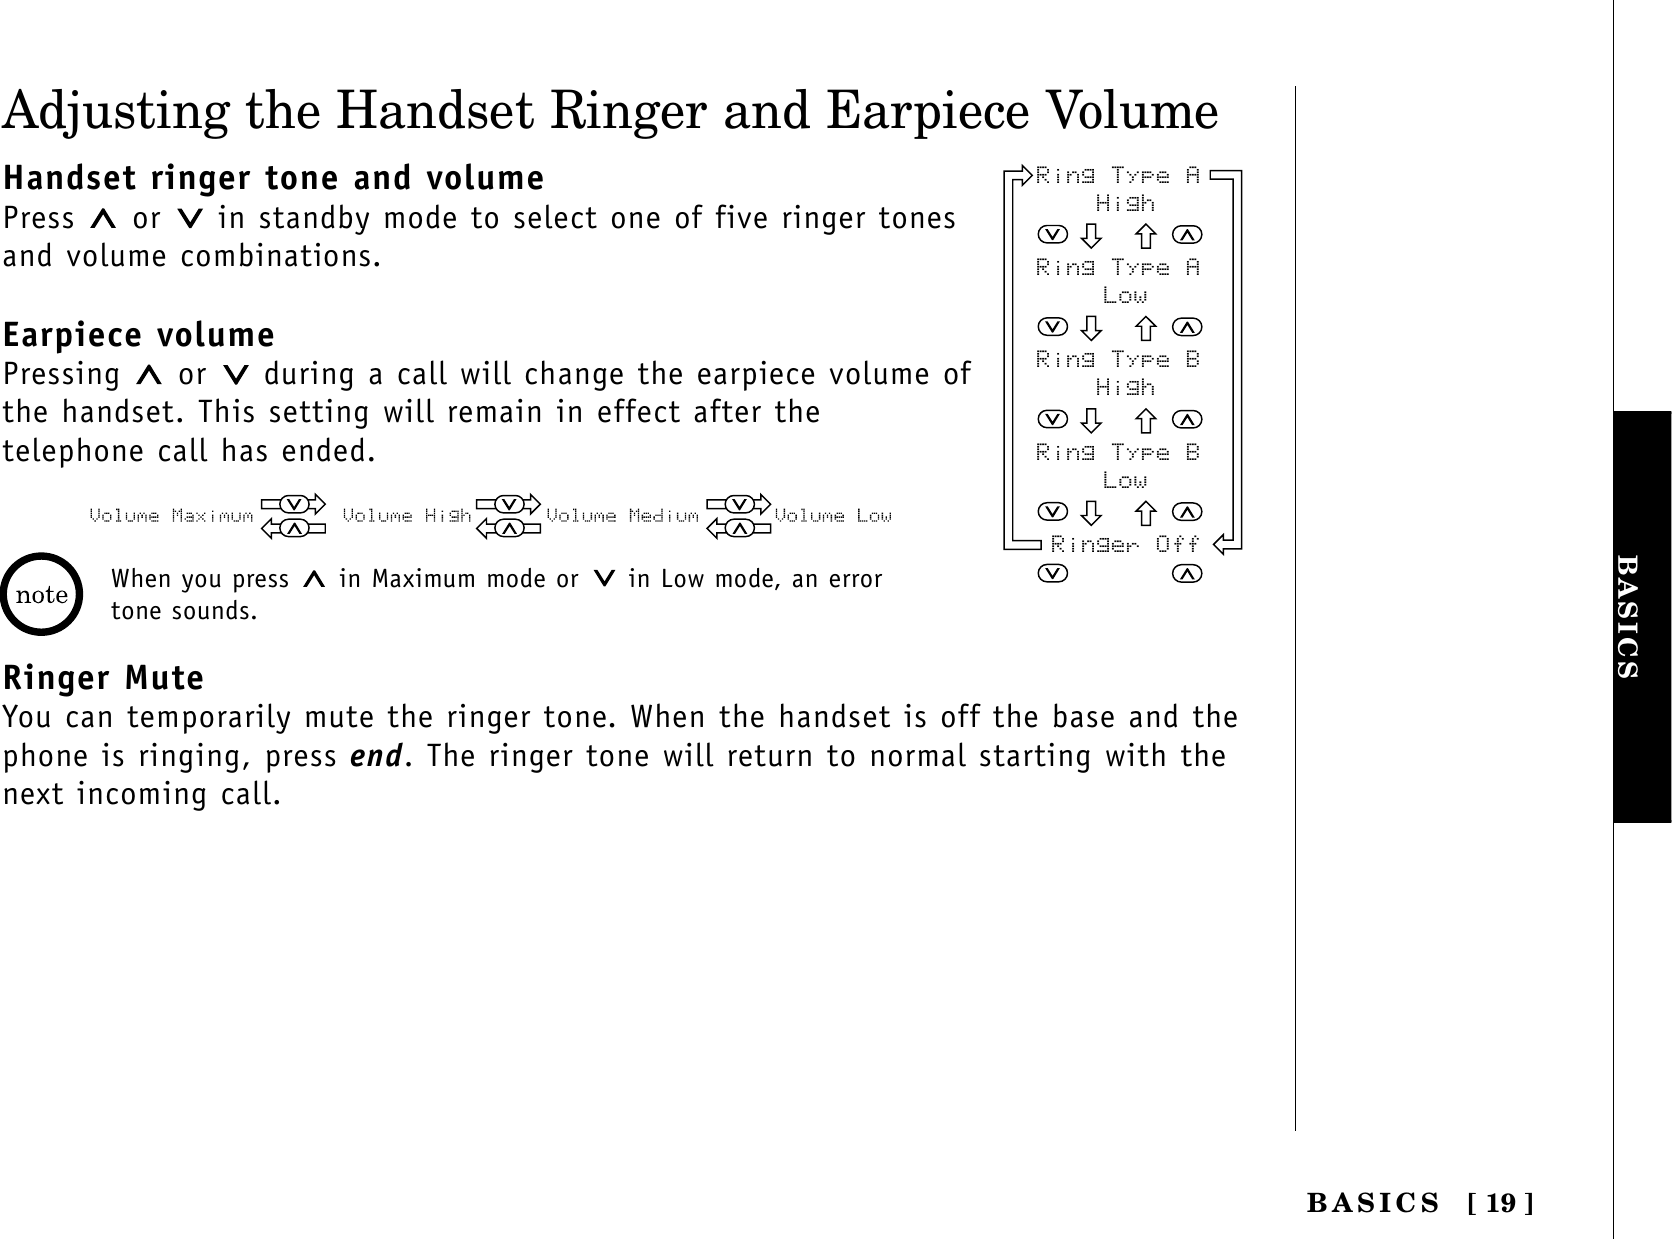 [ 19 ]BASICSBASICSAdjusting the Handset Ringer and Earpiece VolumeHandset ringer tone and volumePress  or  in standby mode to select one of five ringer tonesand volume combinations.Earpiece volumePressing  or  during a call will change the earpiece volume ofthe handset. This setting will remain in effect after the telephone call has ended.Ringer MuteYou can temporarily mute the ringer tone. When the handset is off the base and thephone is ringing, press end. The ringer tone will return to normal starting with thenext incoming call.Ring Type A HighRing Type A LowRing Type B HighRing Type B LowRinger OffWhen you press  in Maximum mode or  in Low mode, an errortone sounds.